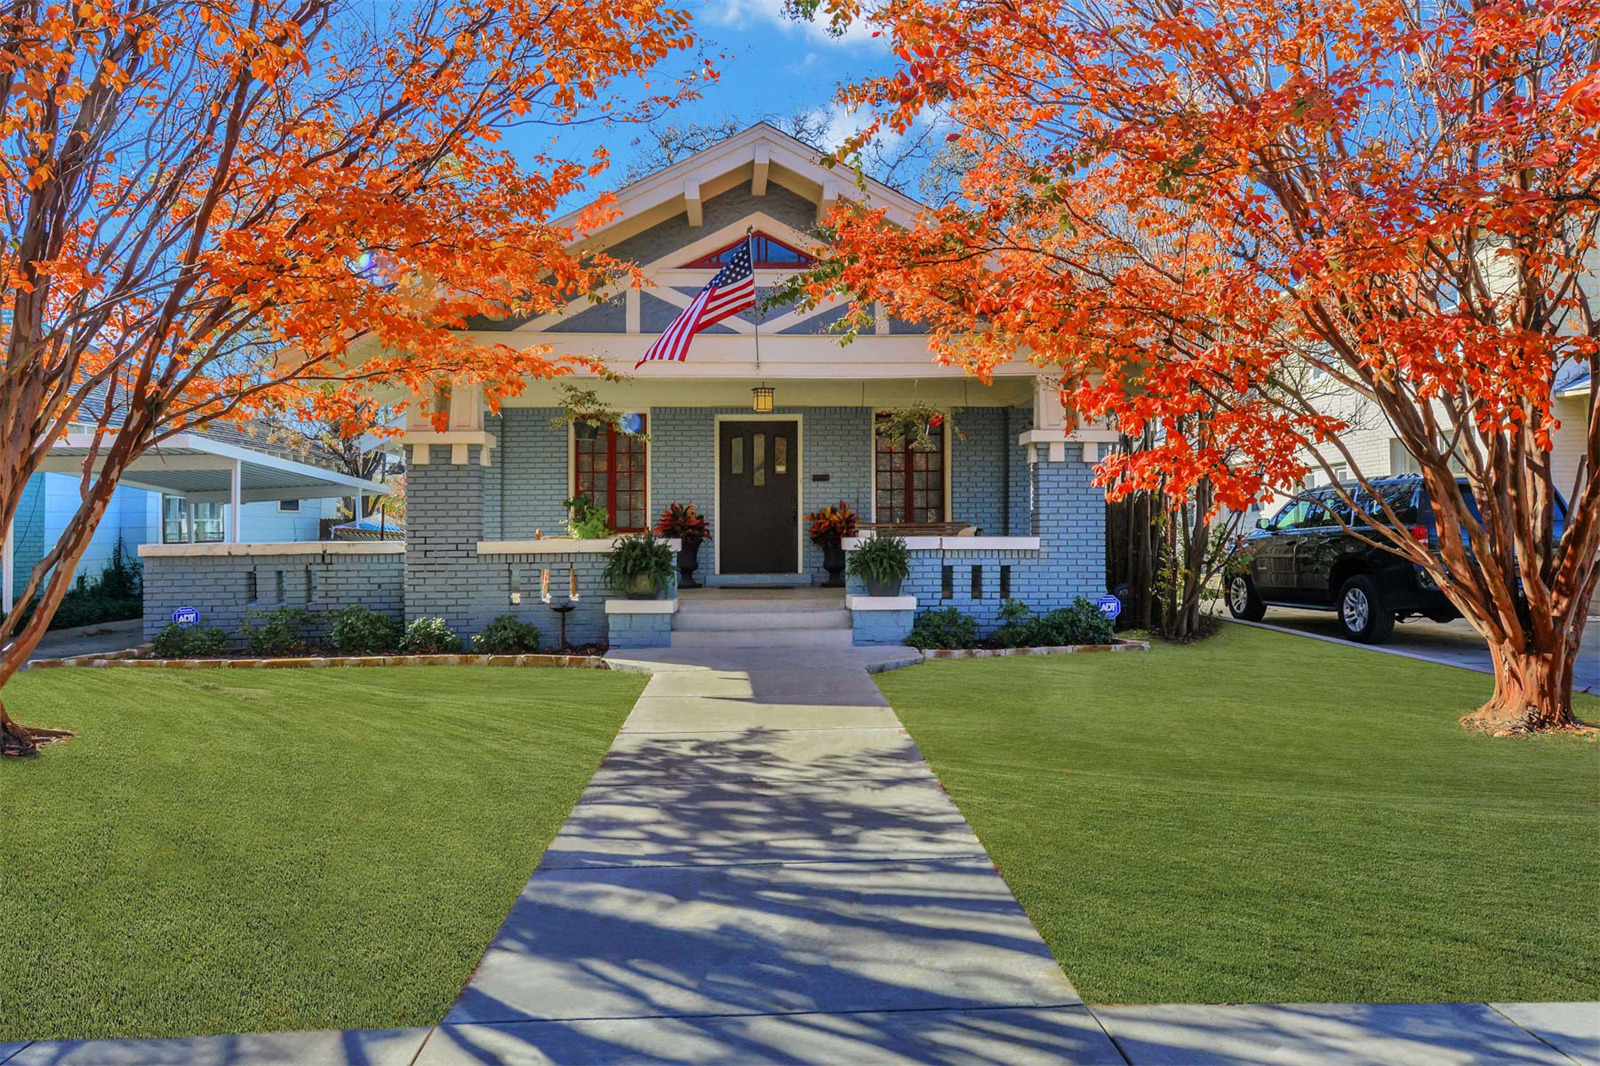 Exterior shot of blue-brick Craftstman style home with large front porch and a path leading to the house from the yard. Red-leaved trees frame the view. 